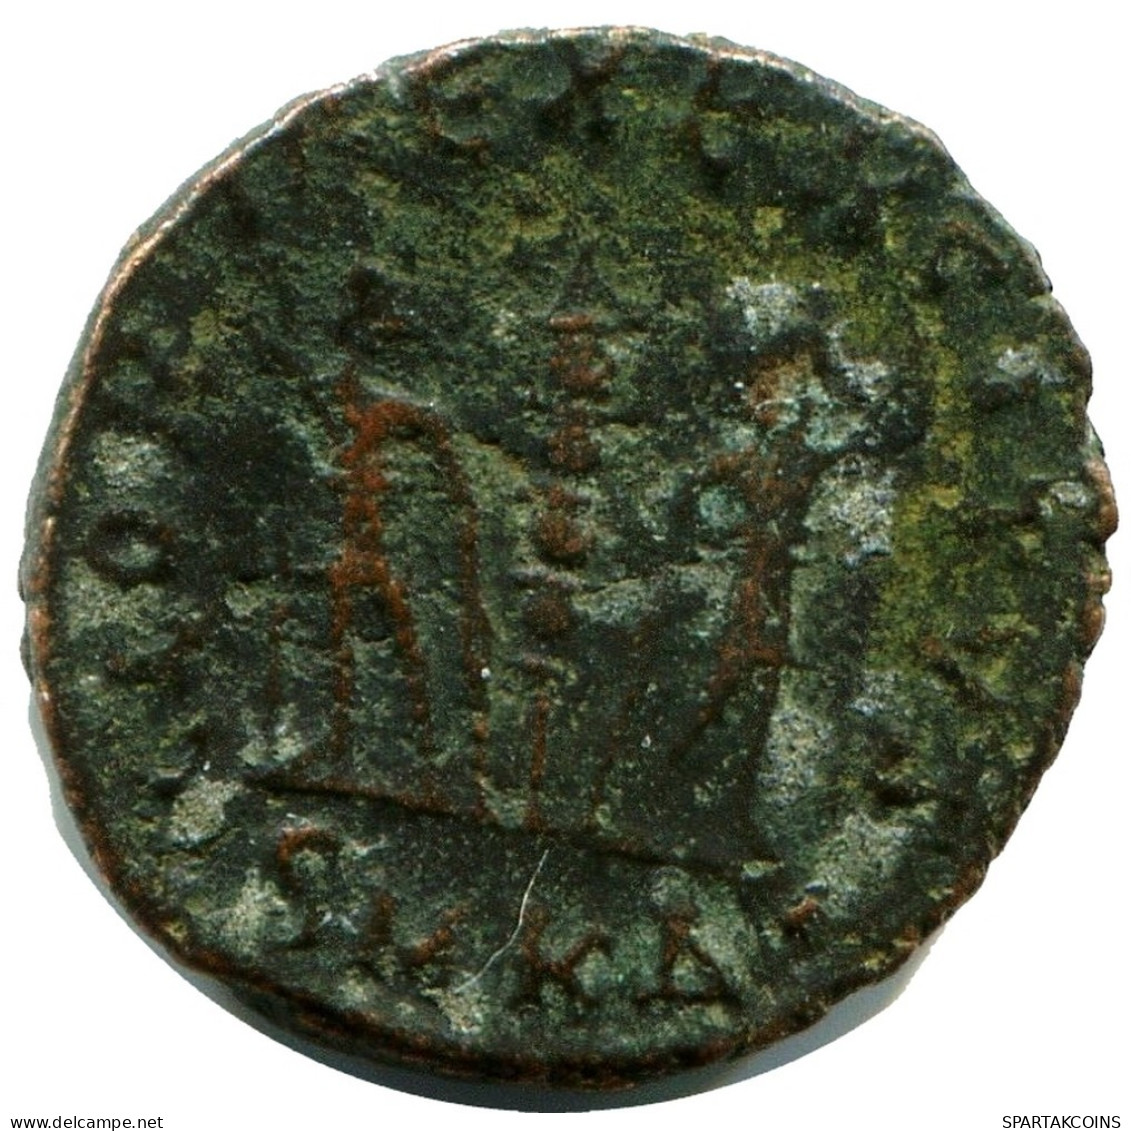 CONSTANS MINTED IN CYZICUS FROM THE ROYAL ONTARIO MUSEUM #ANC11633.14.D.A - El Imperio Christiano (307 / 363)